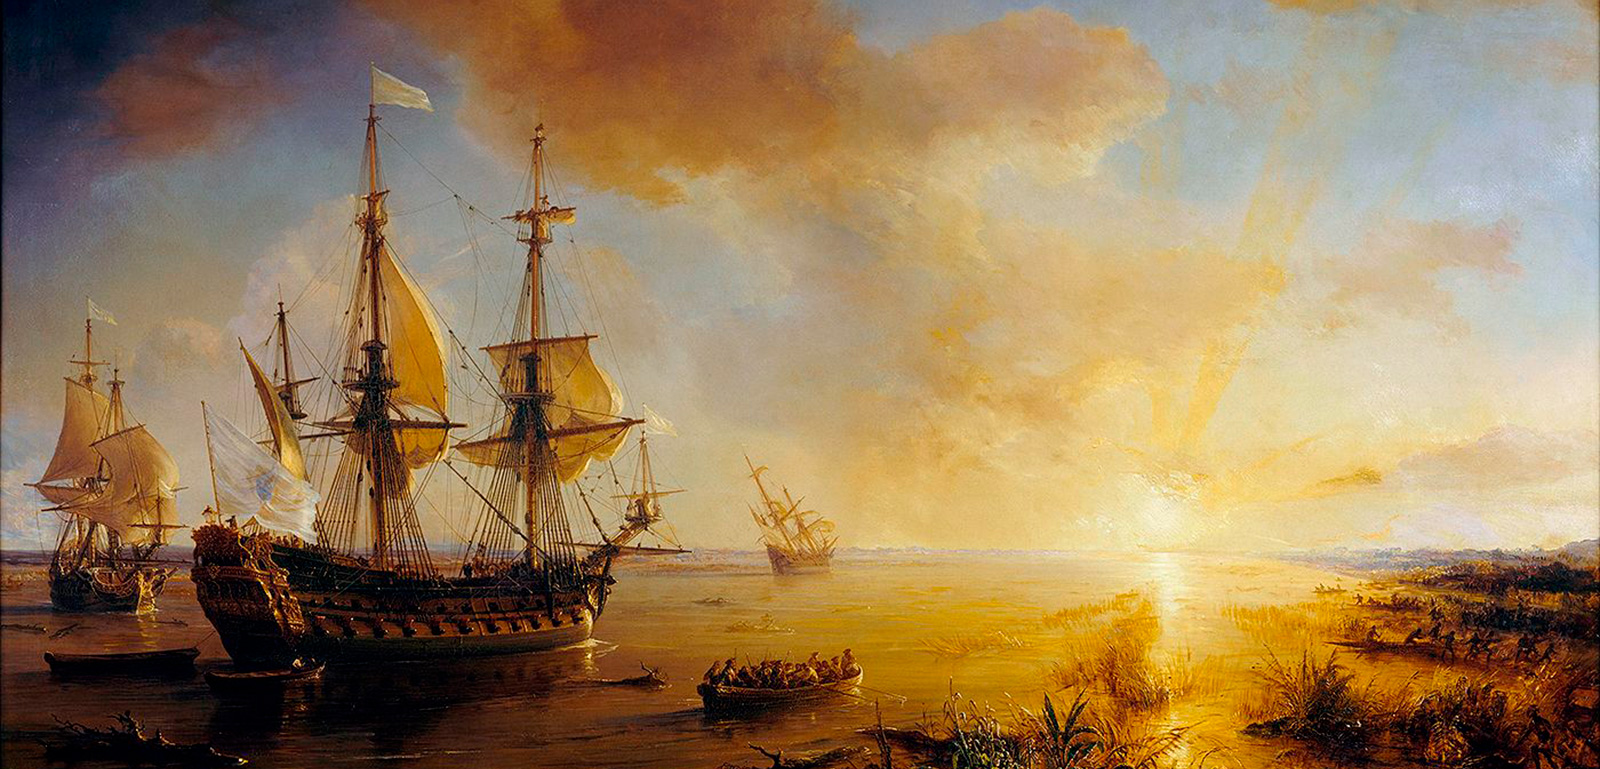 La Salle's Expedition to Louisiana in 1684, painted in 1844 by Jean Antoine Théodore de Gudin